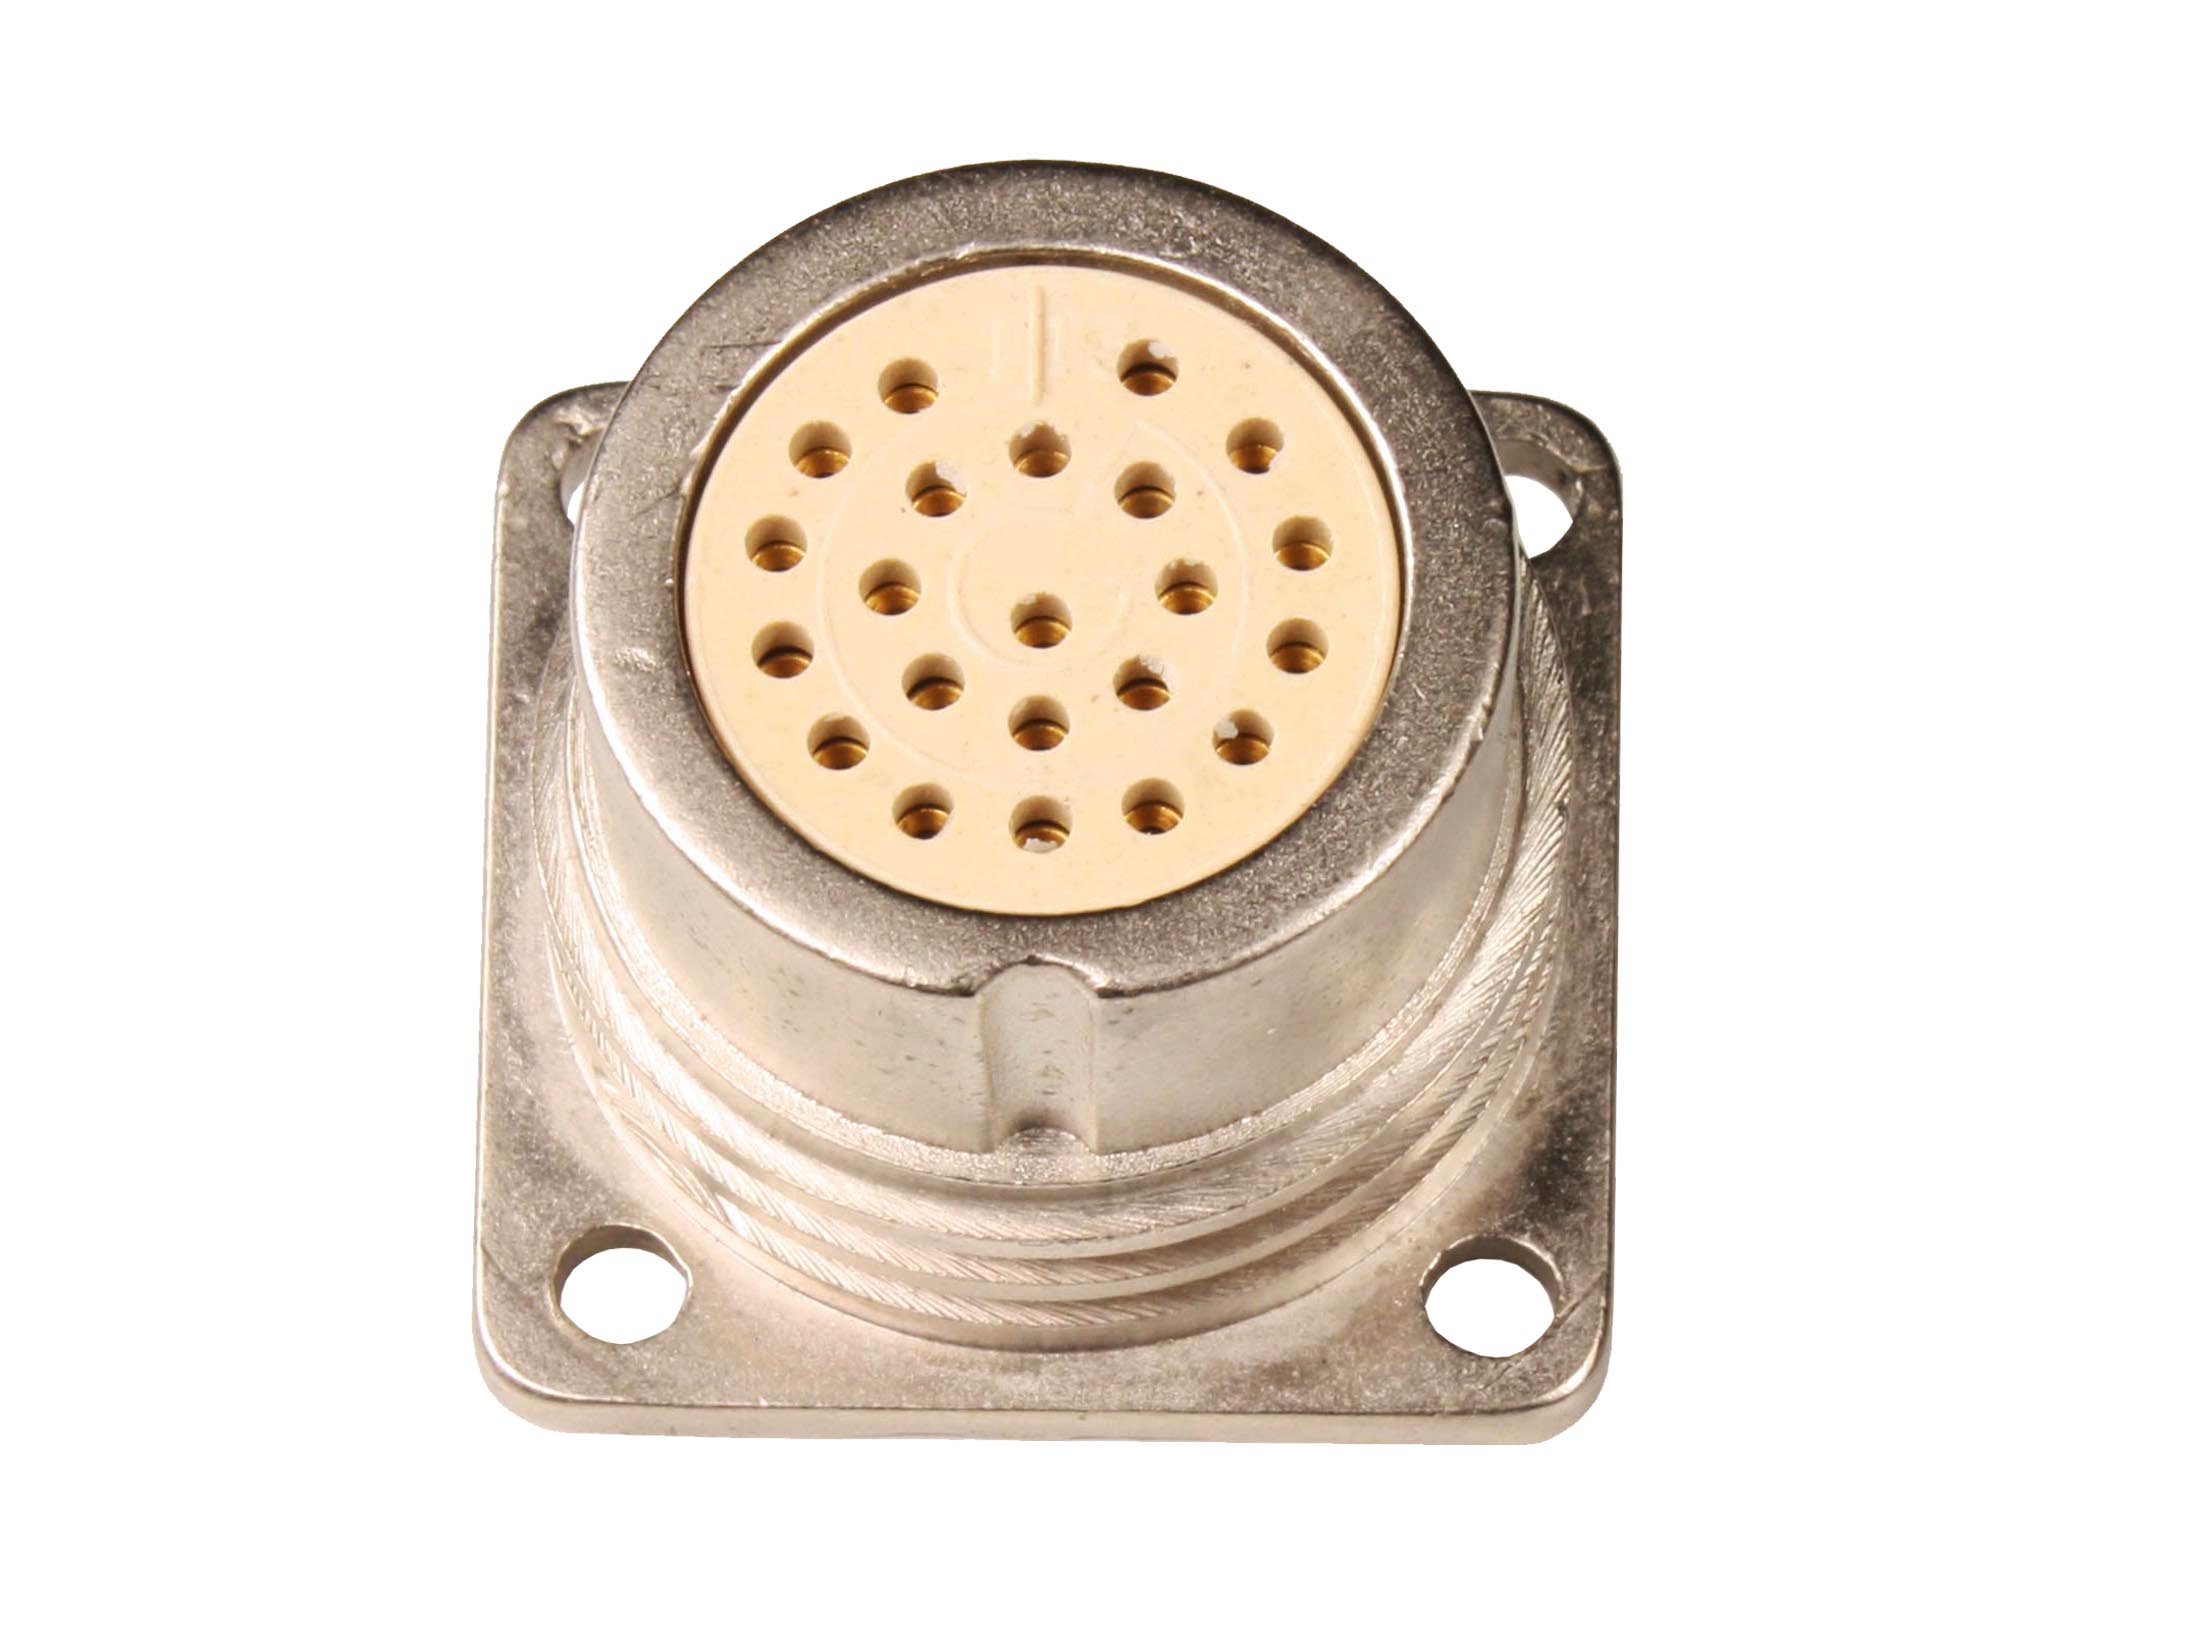 BHE20B22 - 22 Contacts Female Receptacle Size 20 Circular Connector - 920222PS